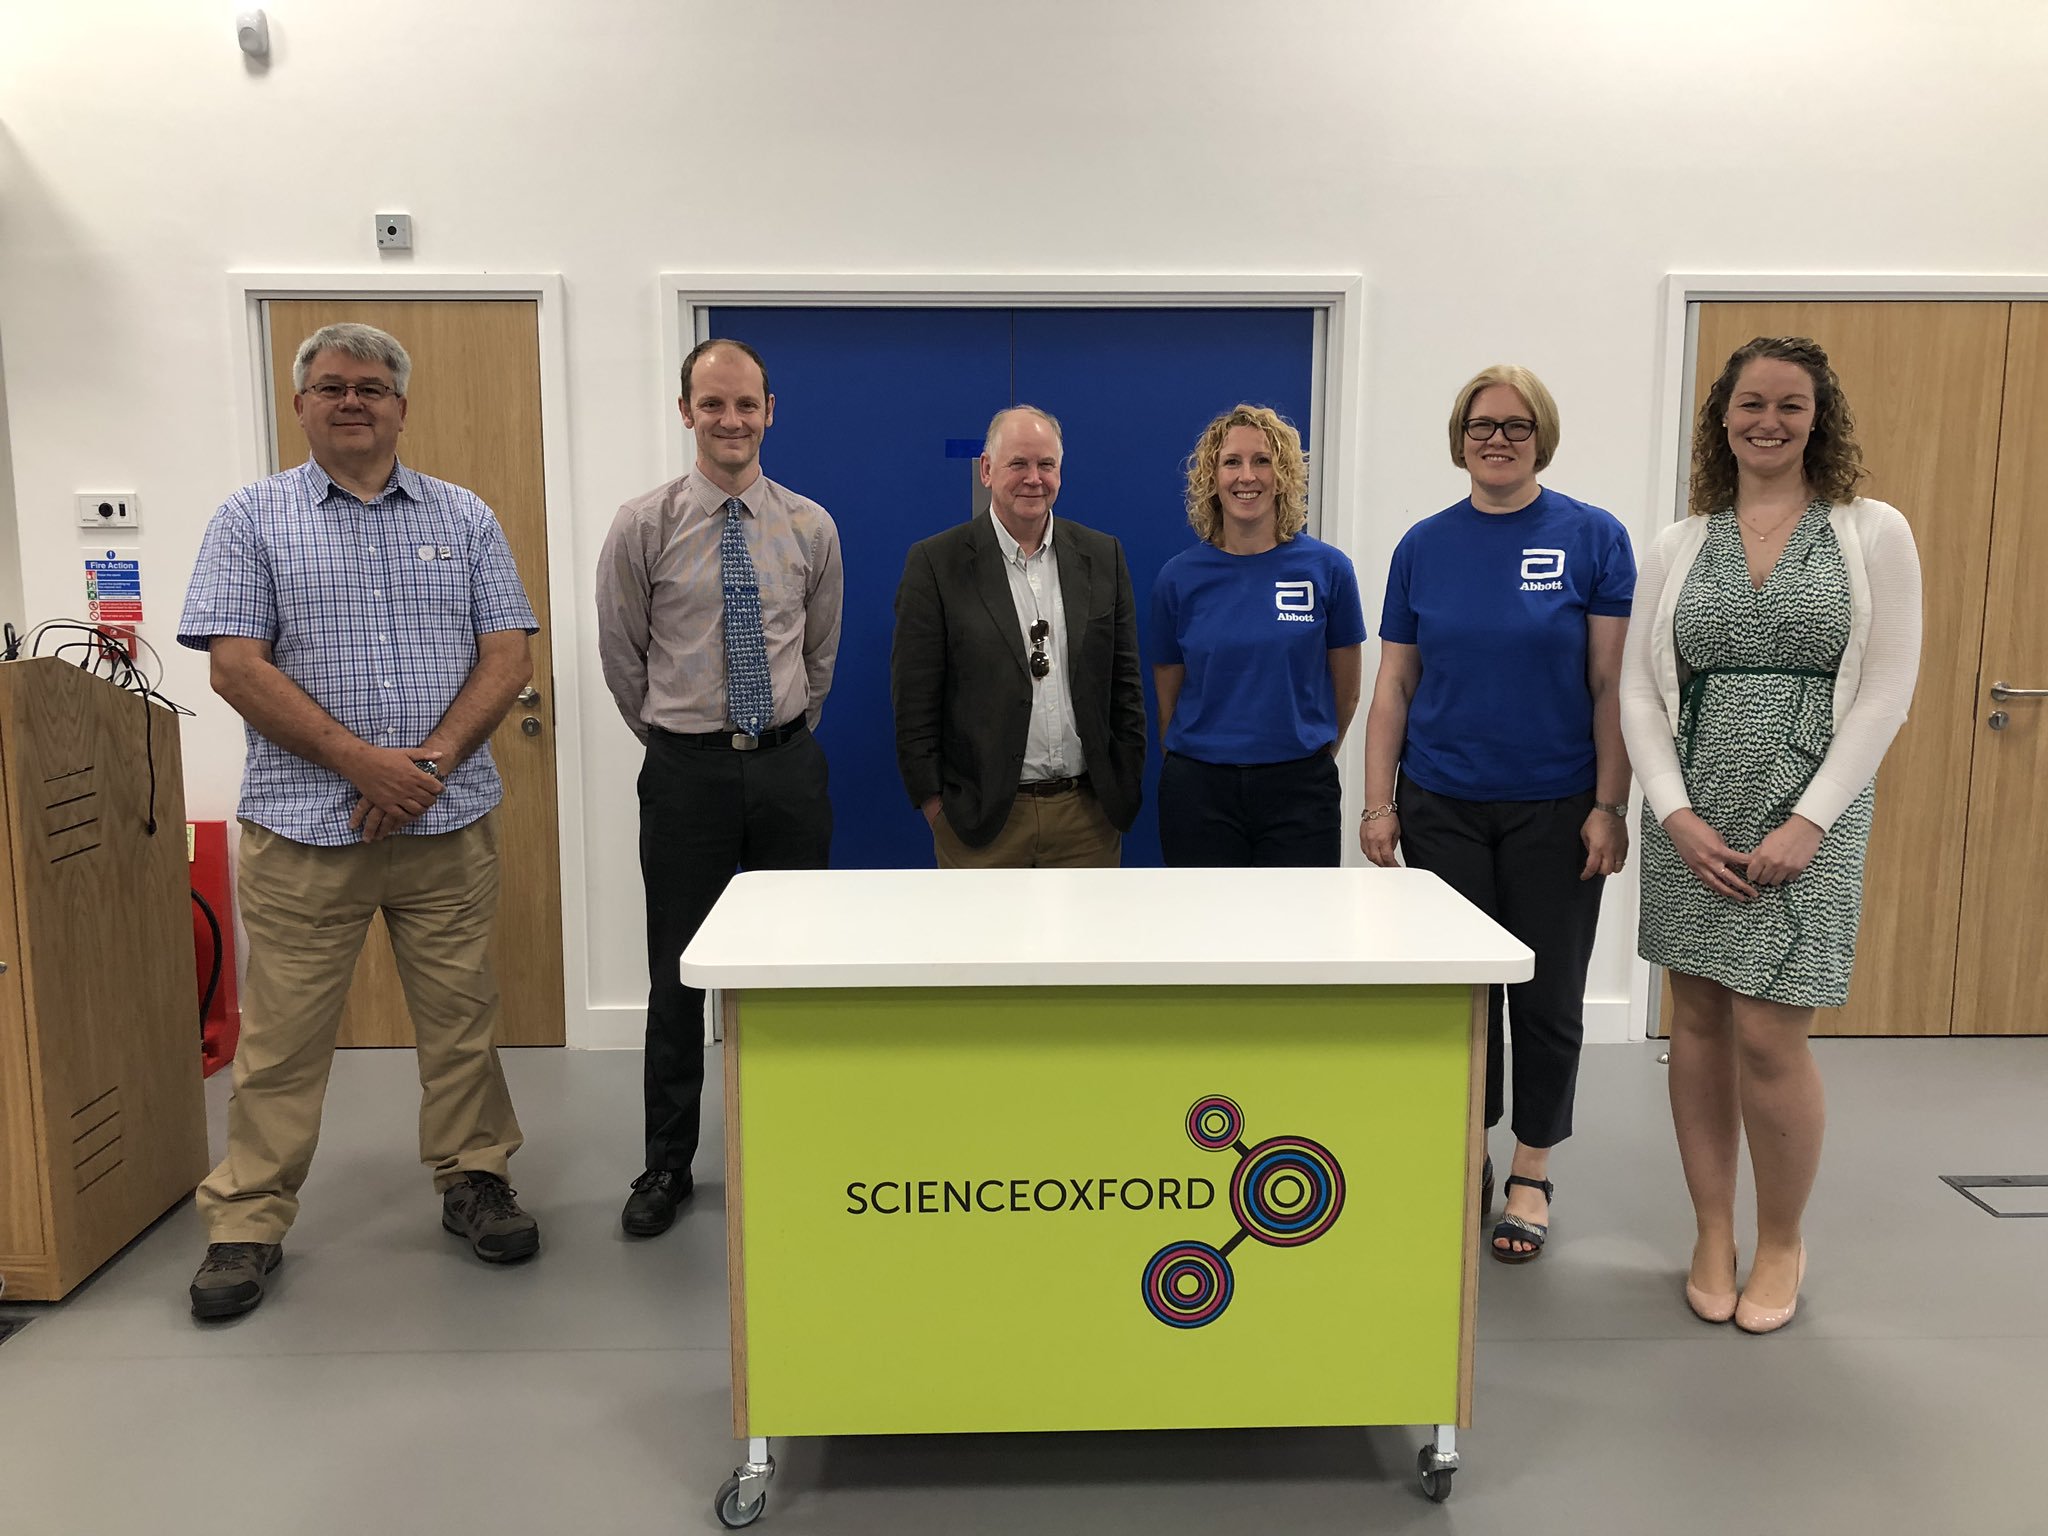 The judges for the Buckinghamshire Big Science Event, including Dr David Price of Diamond Light Source